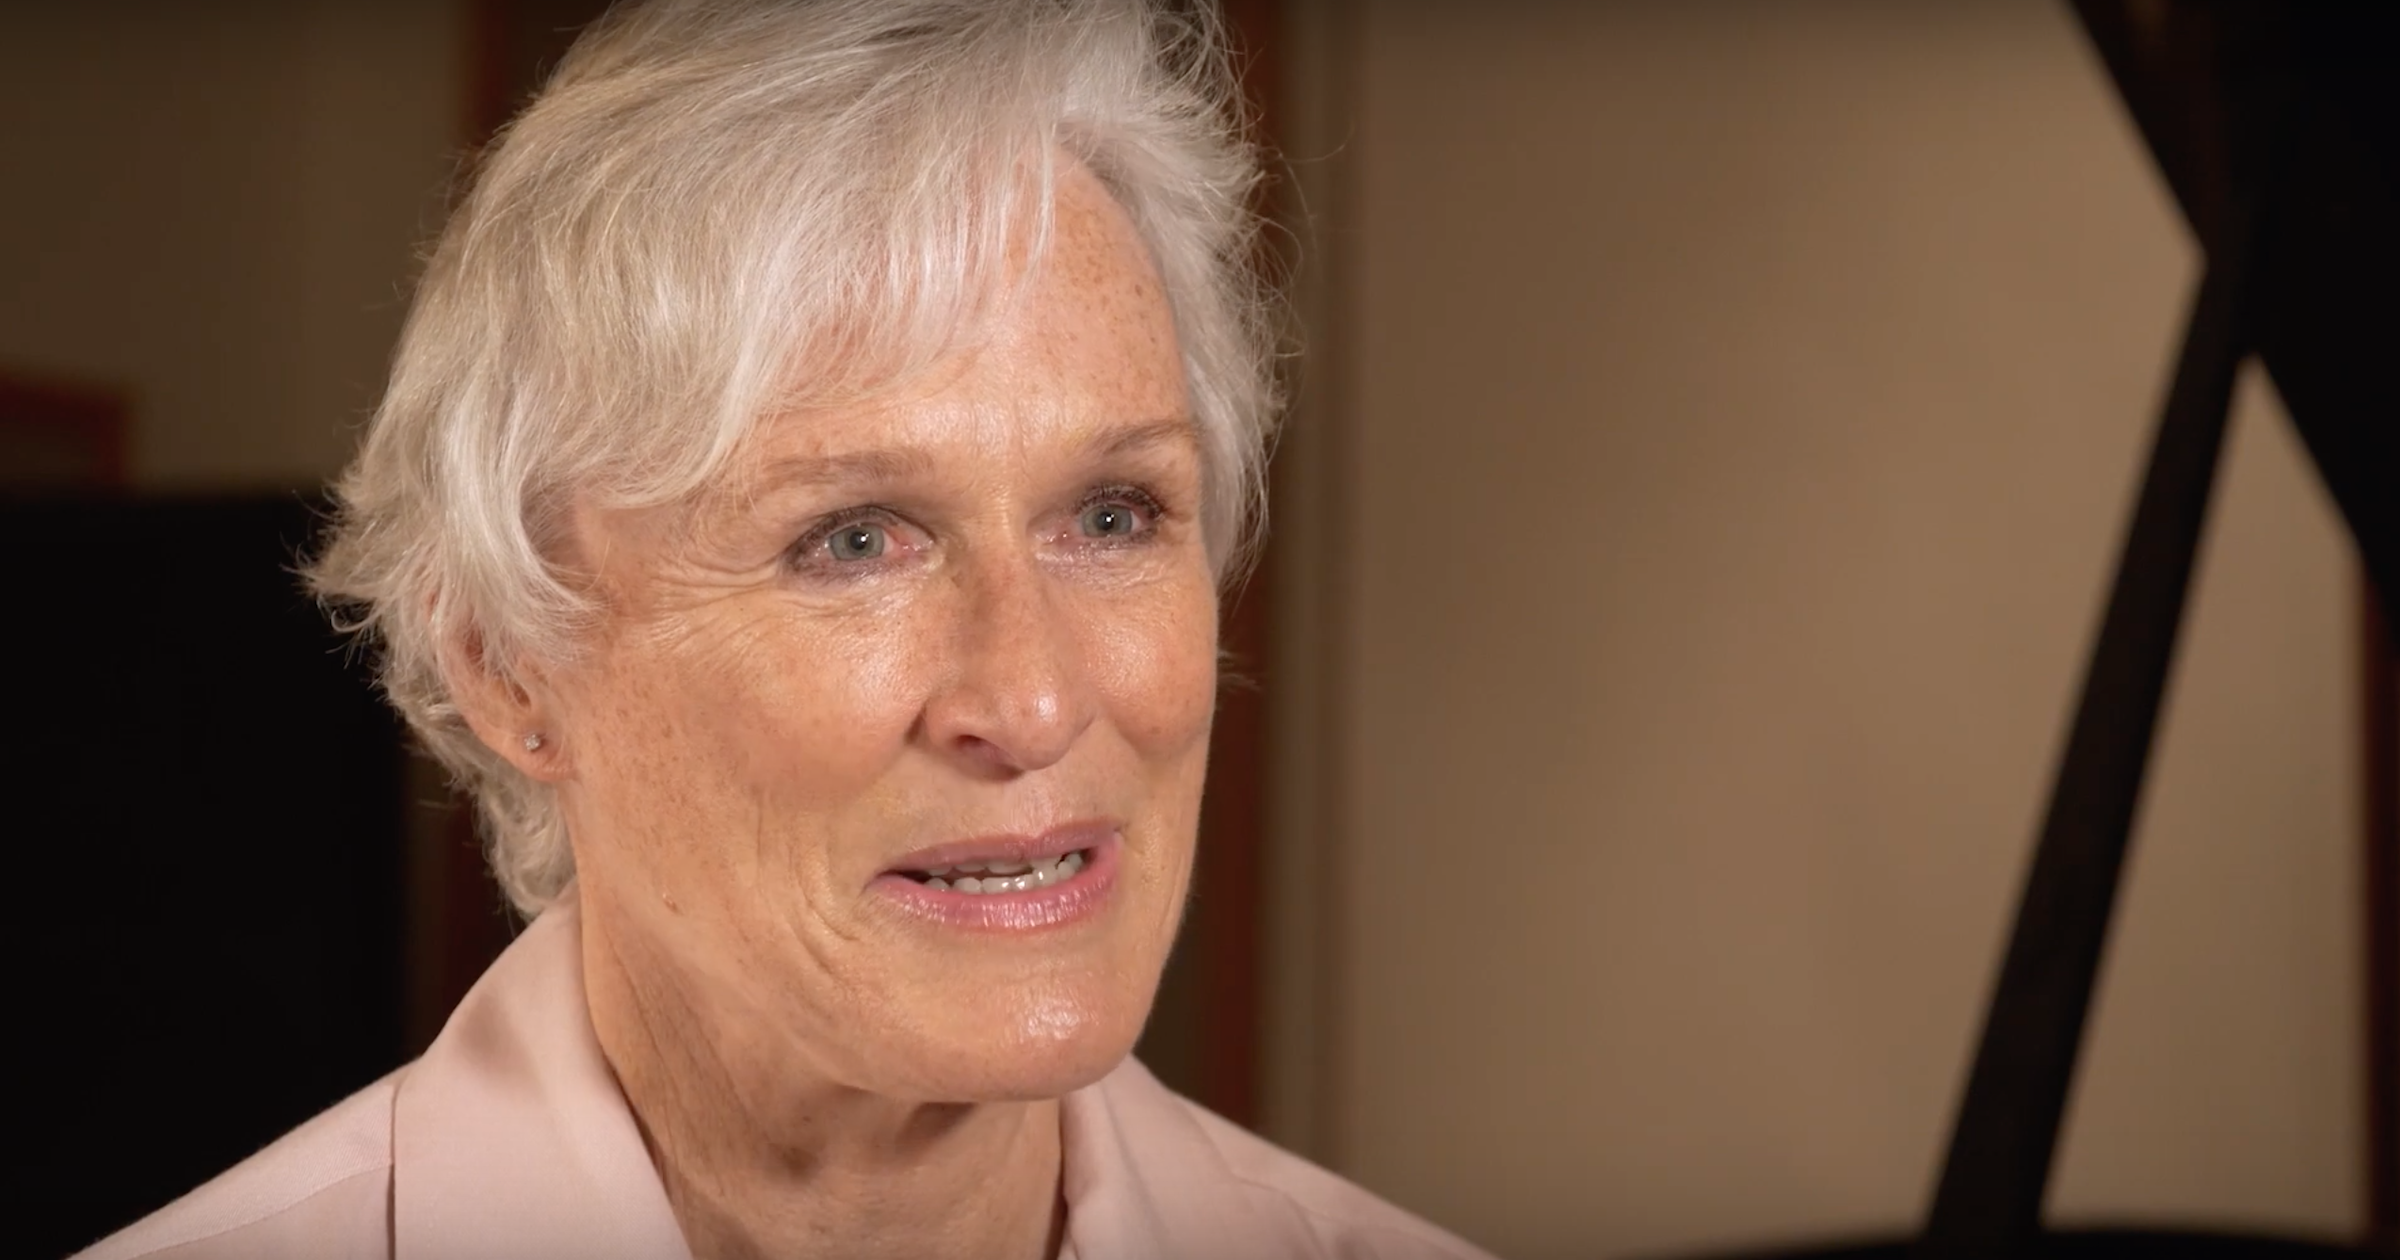 Her Story: Behind-the-scenes with Glenn Close '74, D.A. '89